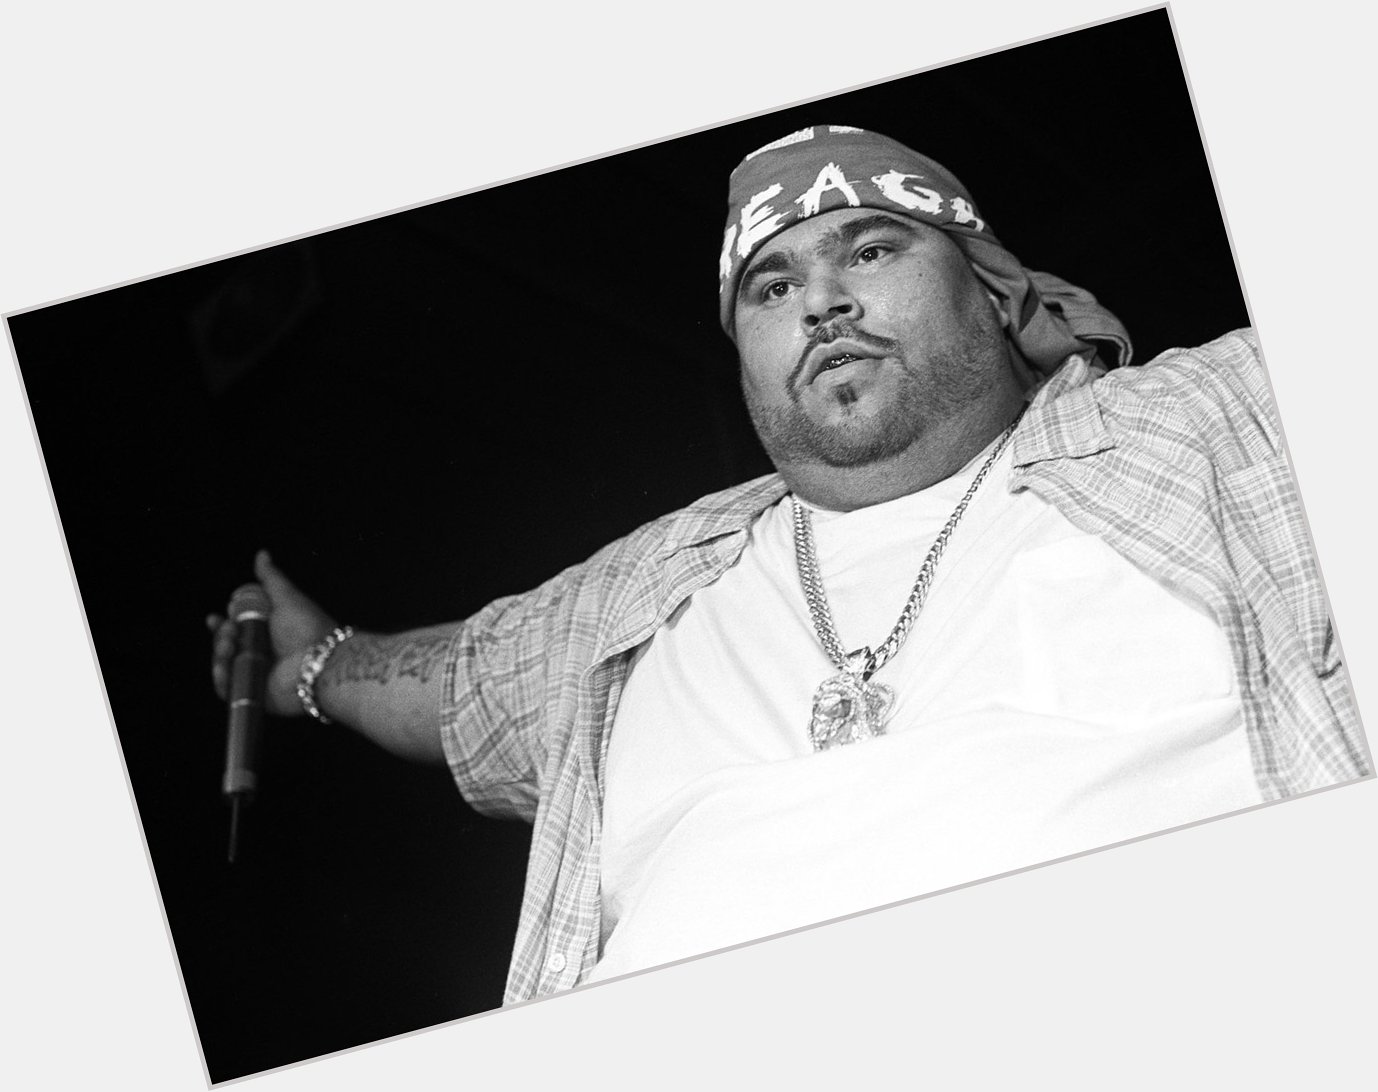 Big Pun would have been 46 today. Happy Birthday and Rest in Peace.  